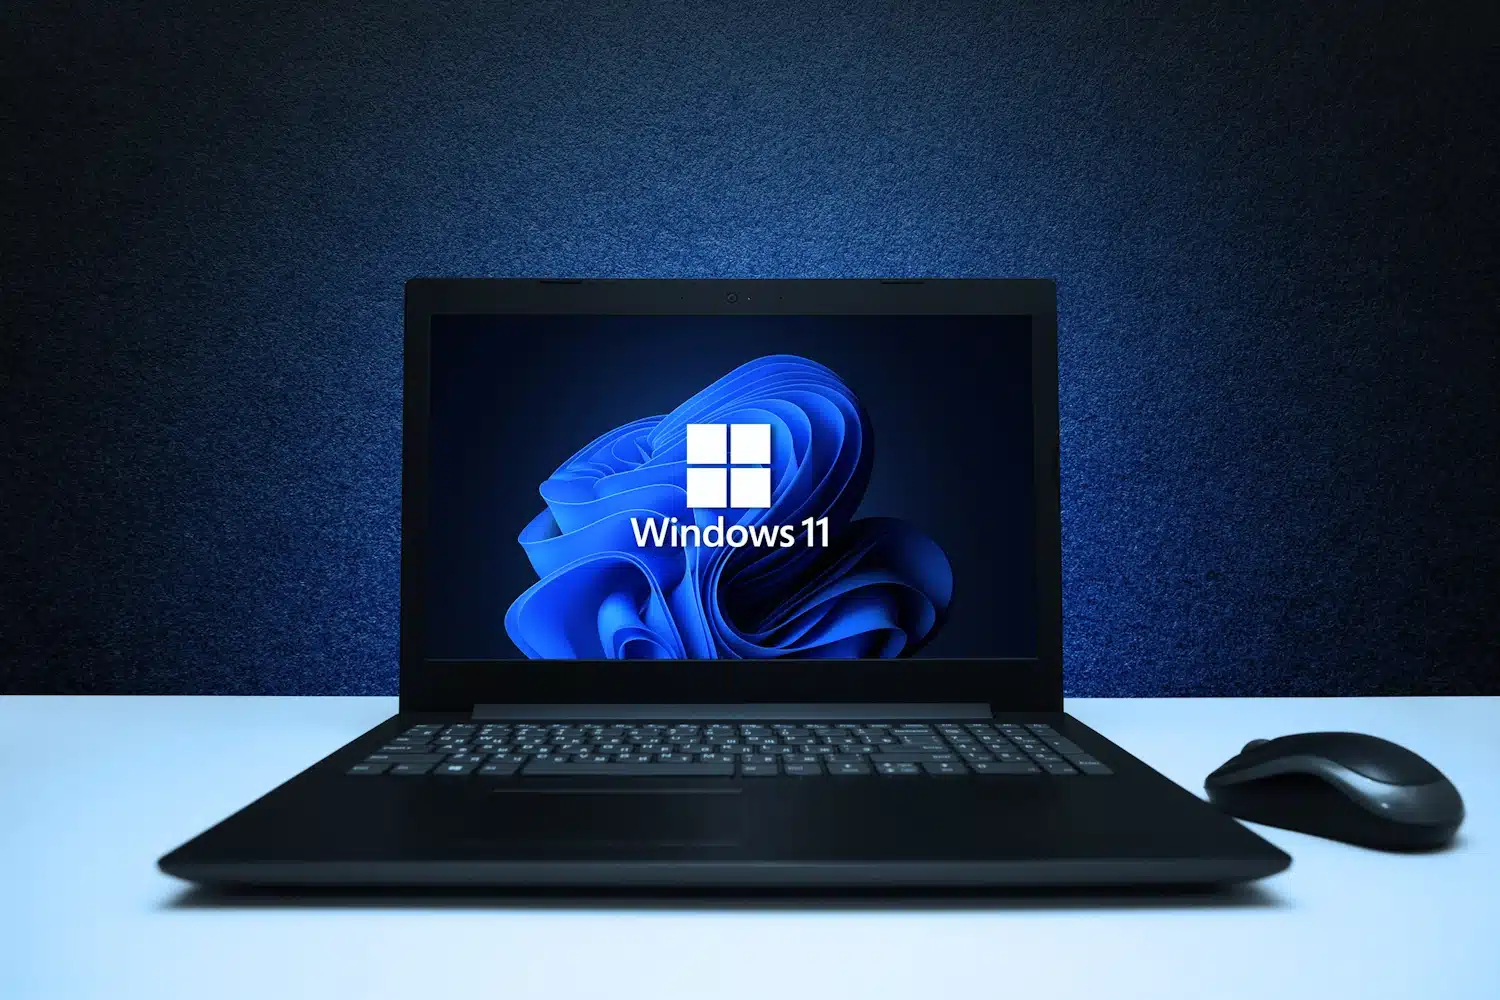 Microsoft acknowledges KB5031455 update causing issues with desktop icons in Windows 11